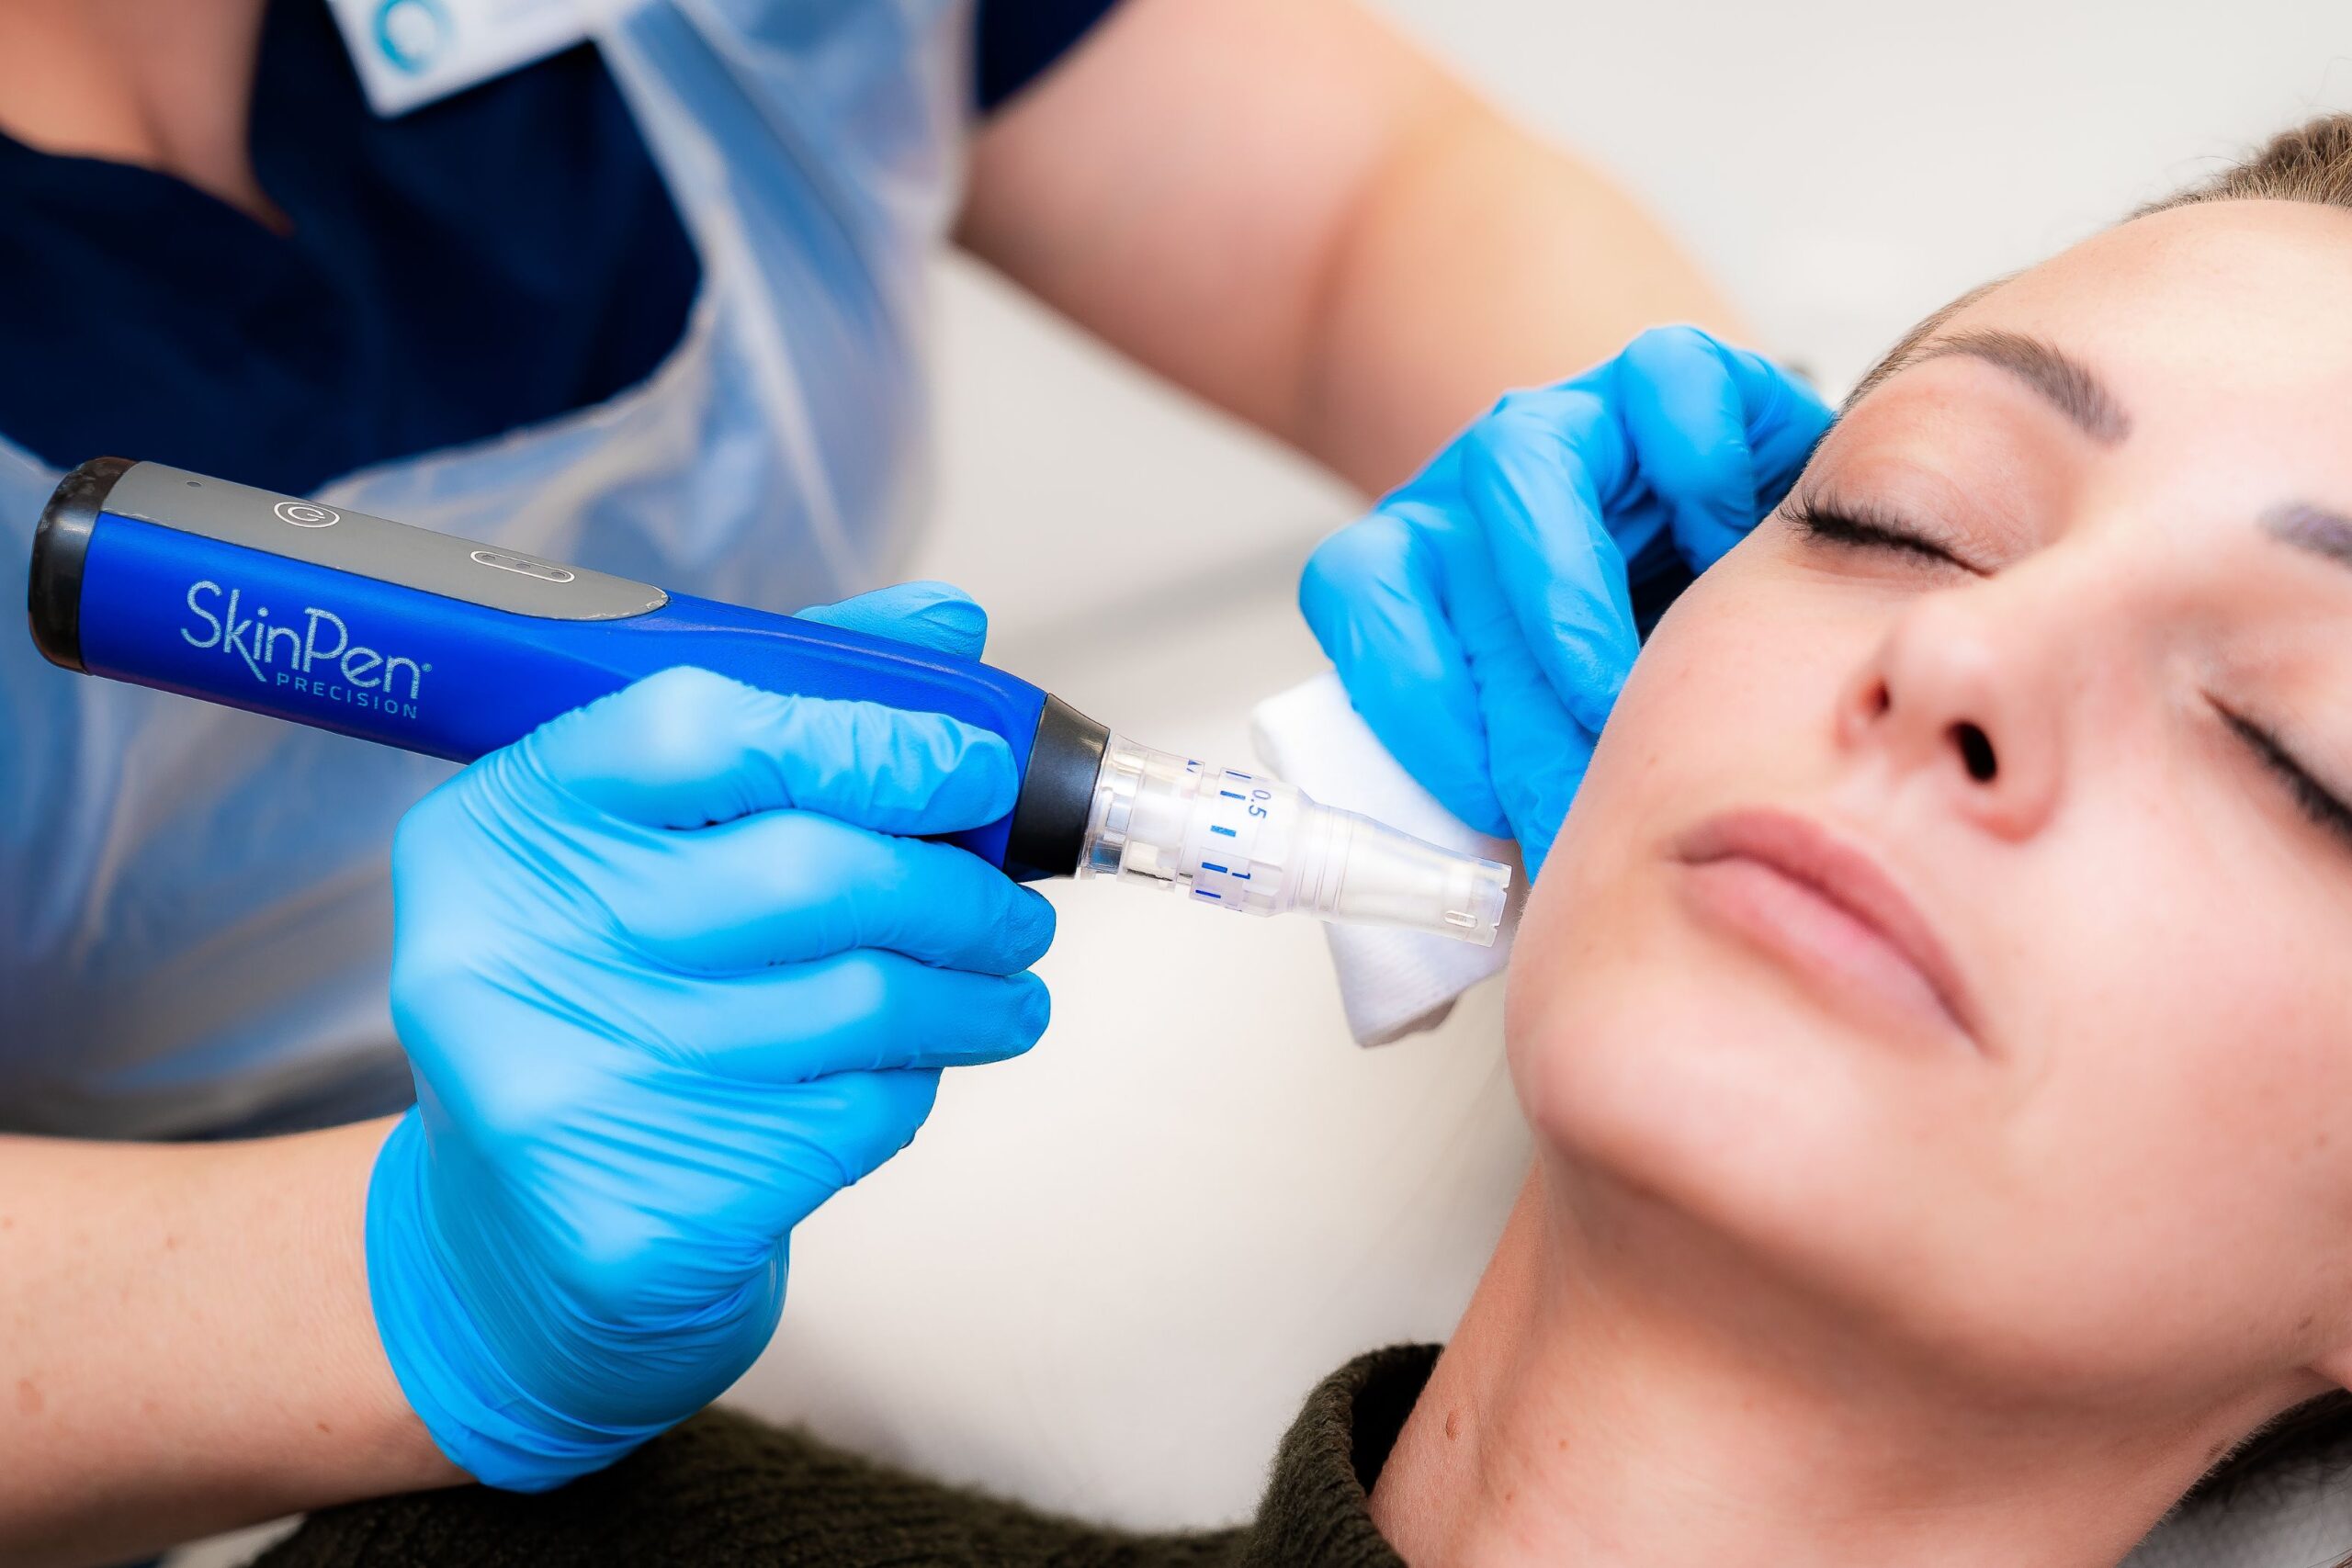 Microneedling for acne scars at Freyja Medical in Wrexham, Nantwich and Cheshire 